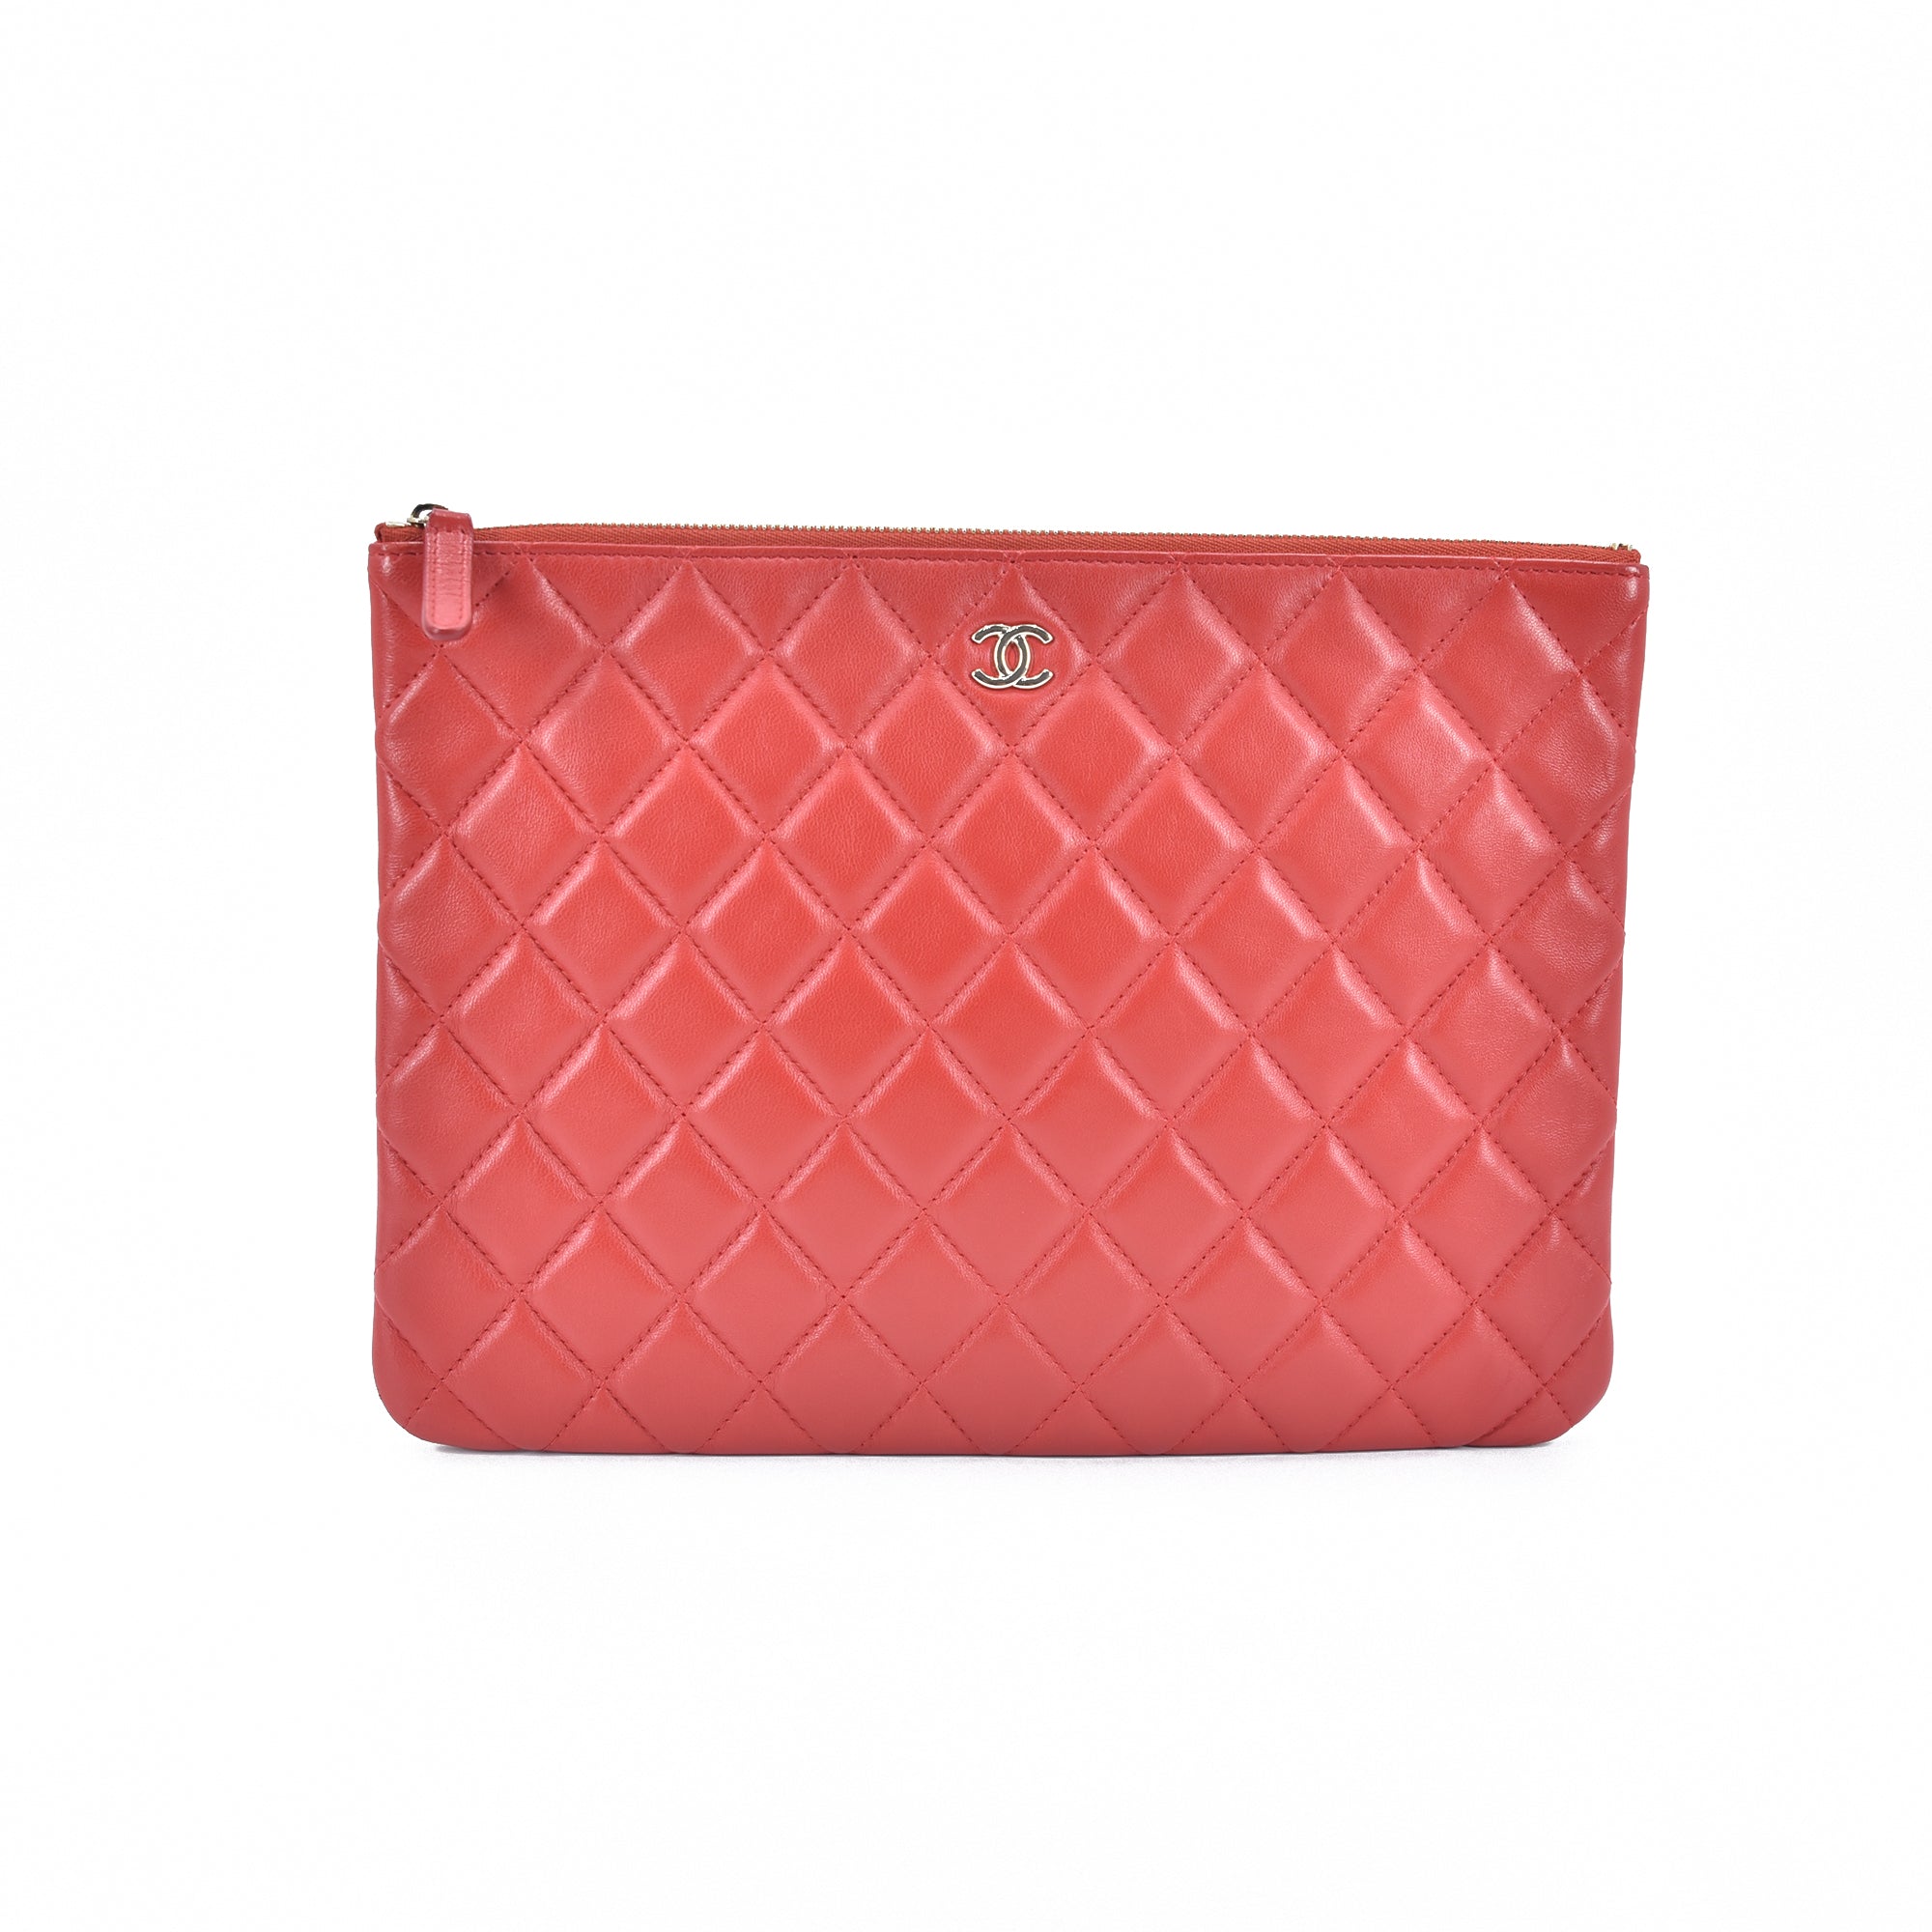 CC Quilted Leather O Case Clutch